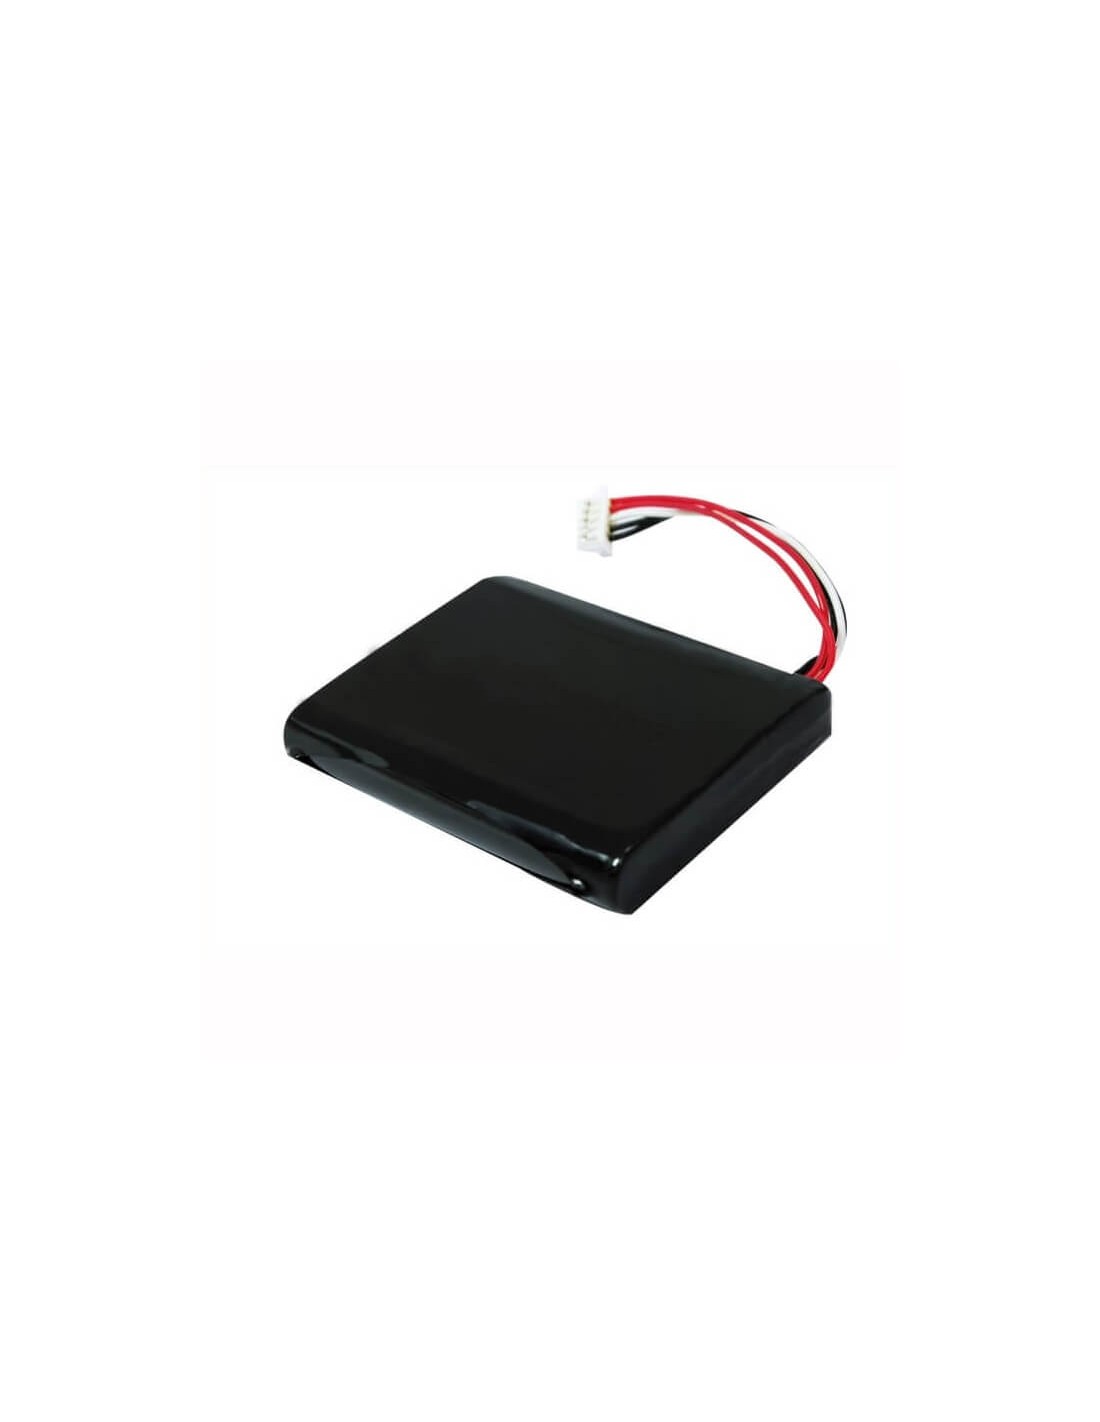 Battery for Tomtom One Xl Hd Traffic 3.7V, 1200mAh - 4.44Wh